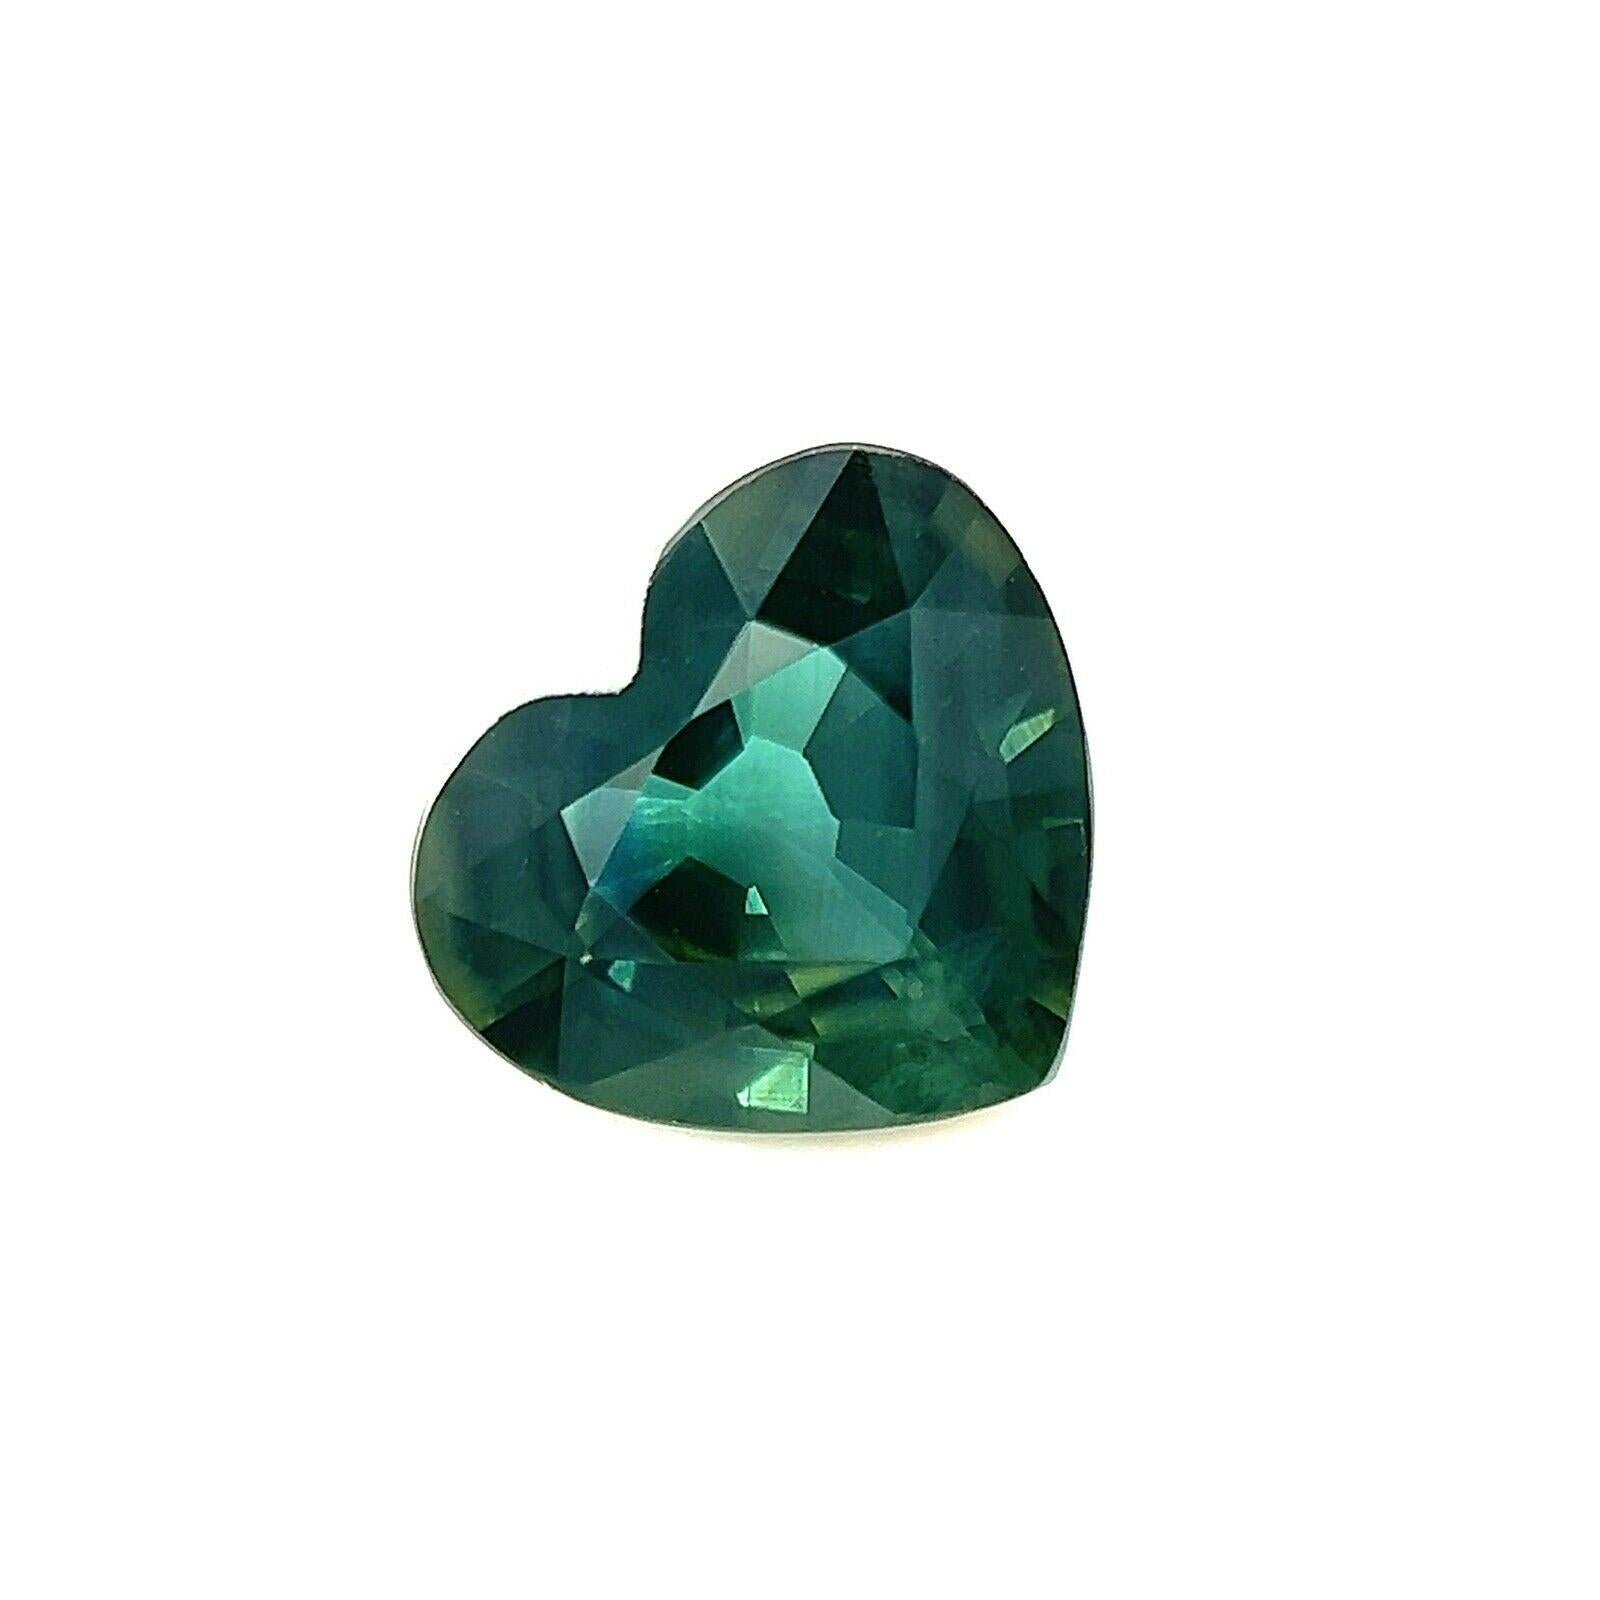 Fine 1.04ct Australian Deep Green Blue Sapphire Heart Cut Rare Gem 7x6.2mm

Natural Green Blue Australian Sapphire Gem.
1.04 Carat with a beautiful deep green blue colour. Has very good clarity, a very clean stone with only some small natural